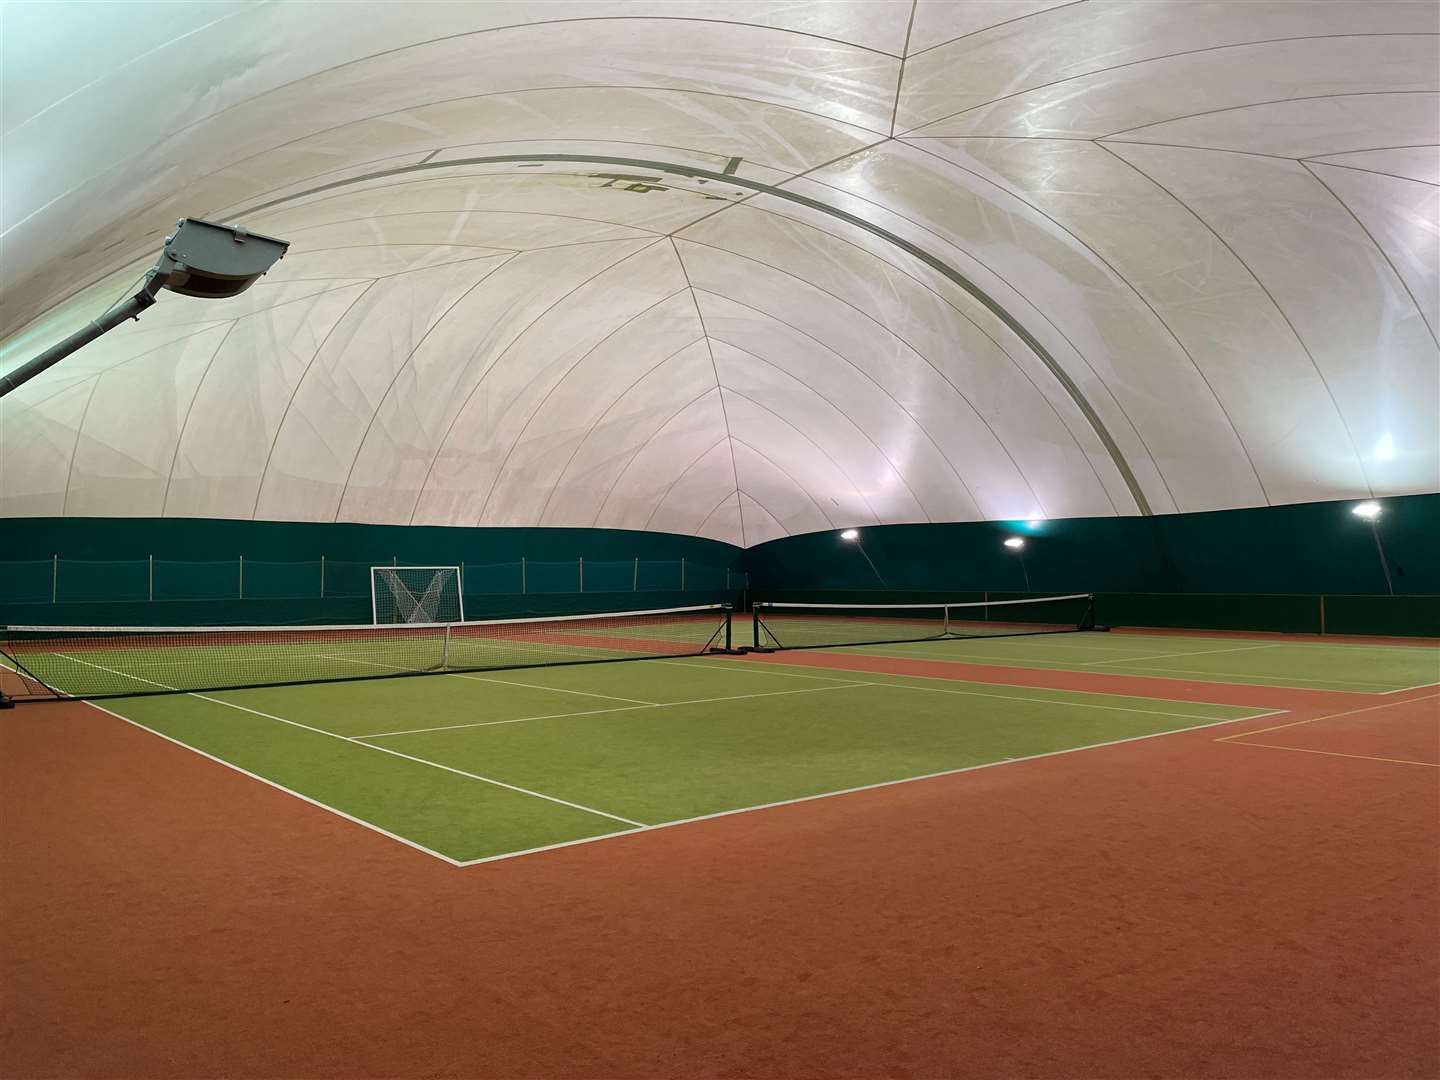 Inside the tennis court dome which also doubles up as a seven-a-side football picth